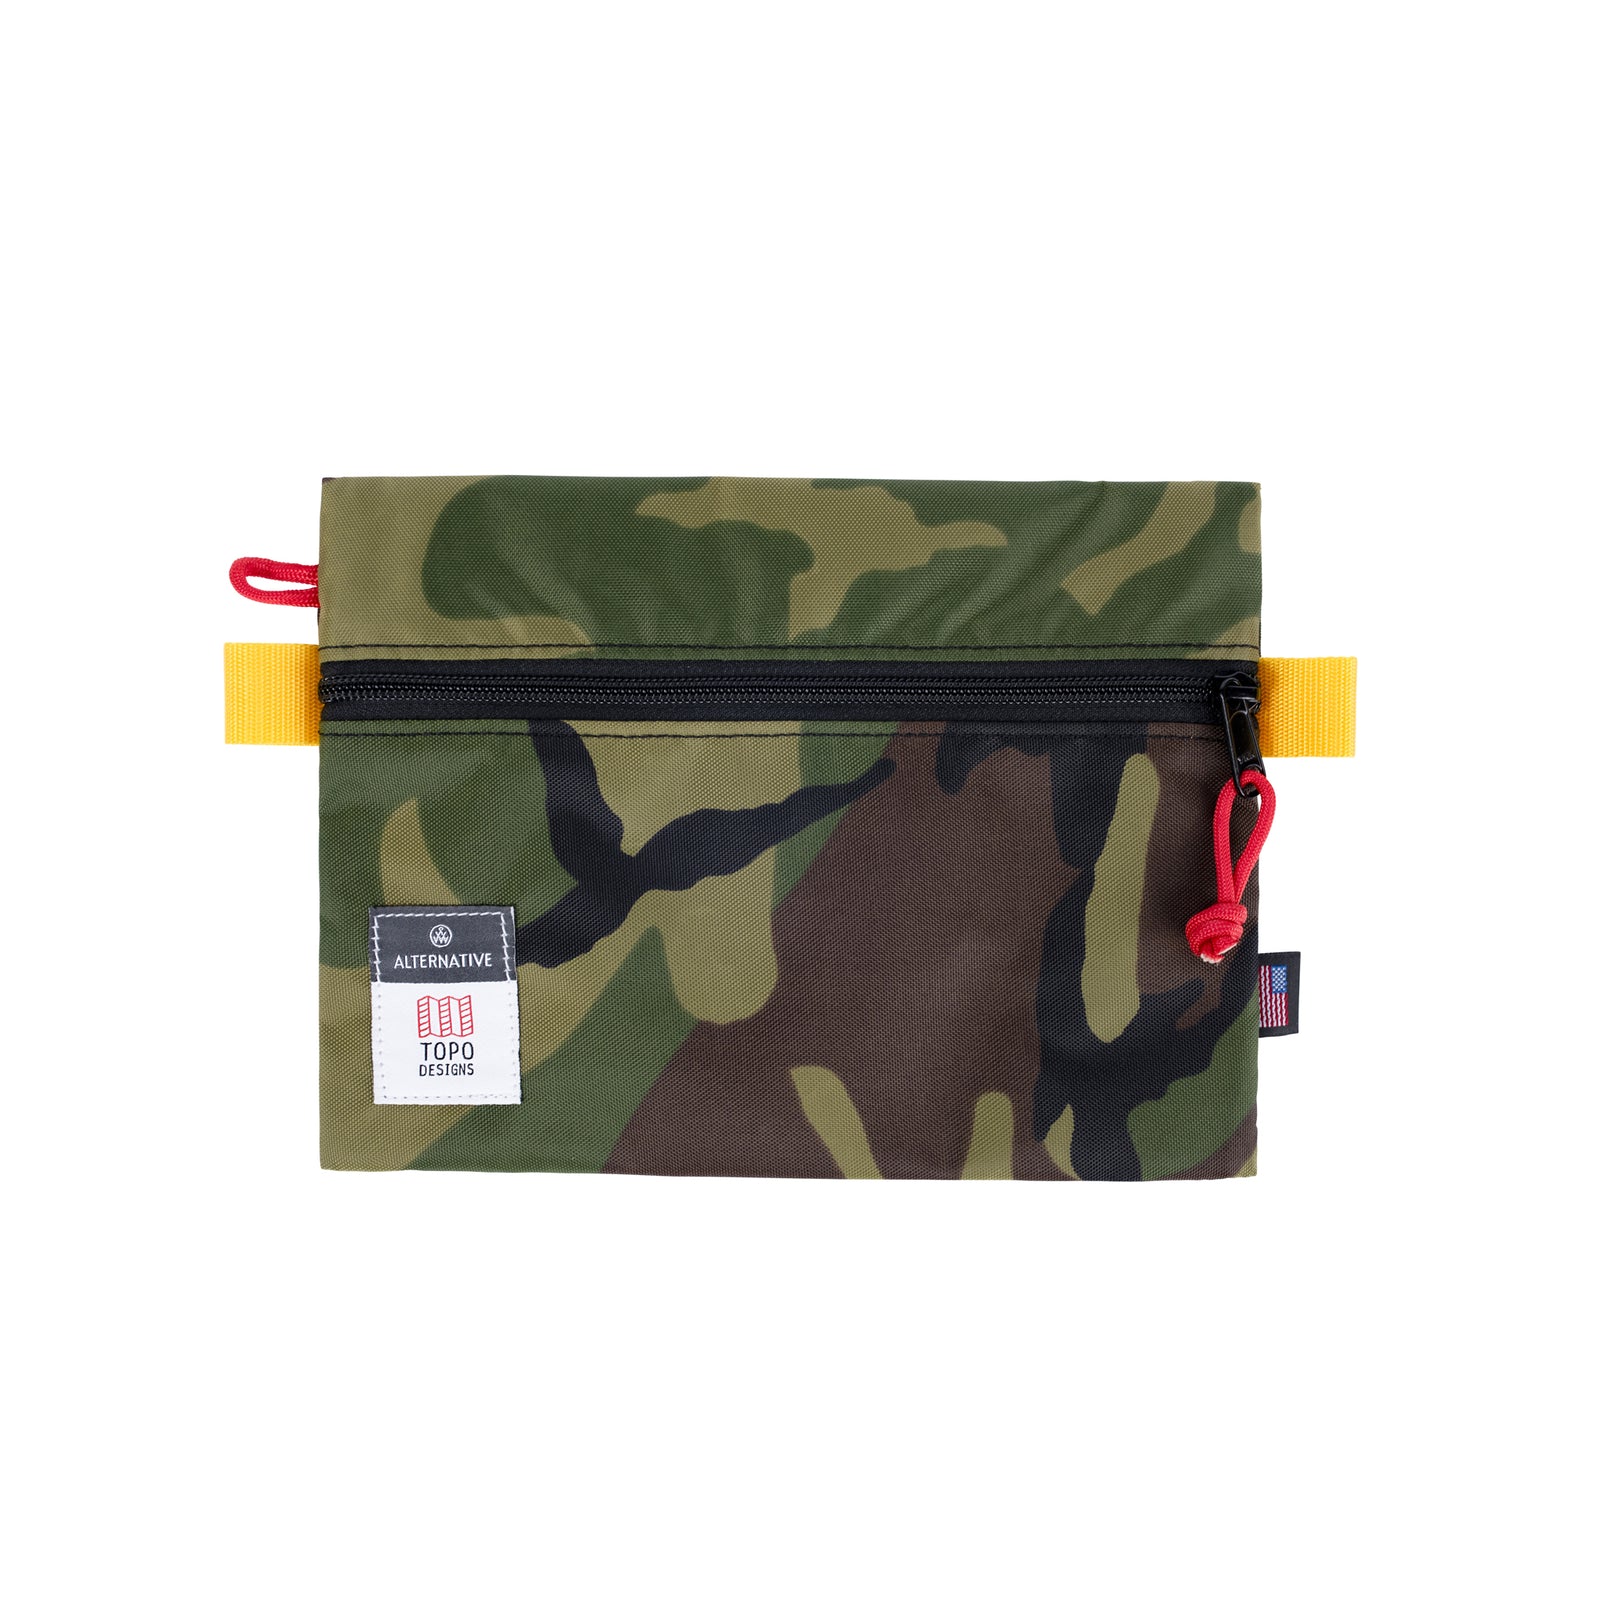 Front product shot of Topo Designs x Alternative Accessory Bags in Woodland Camo